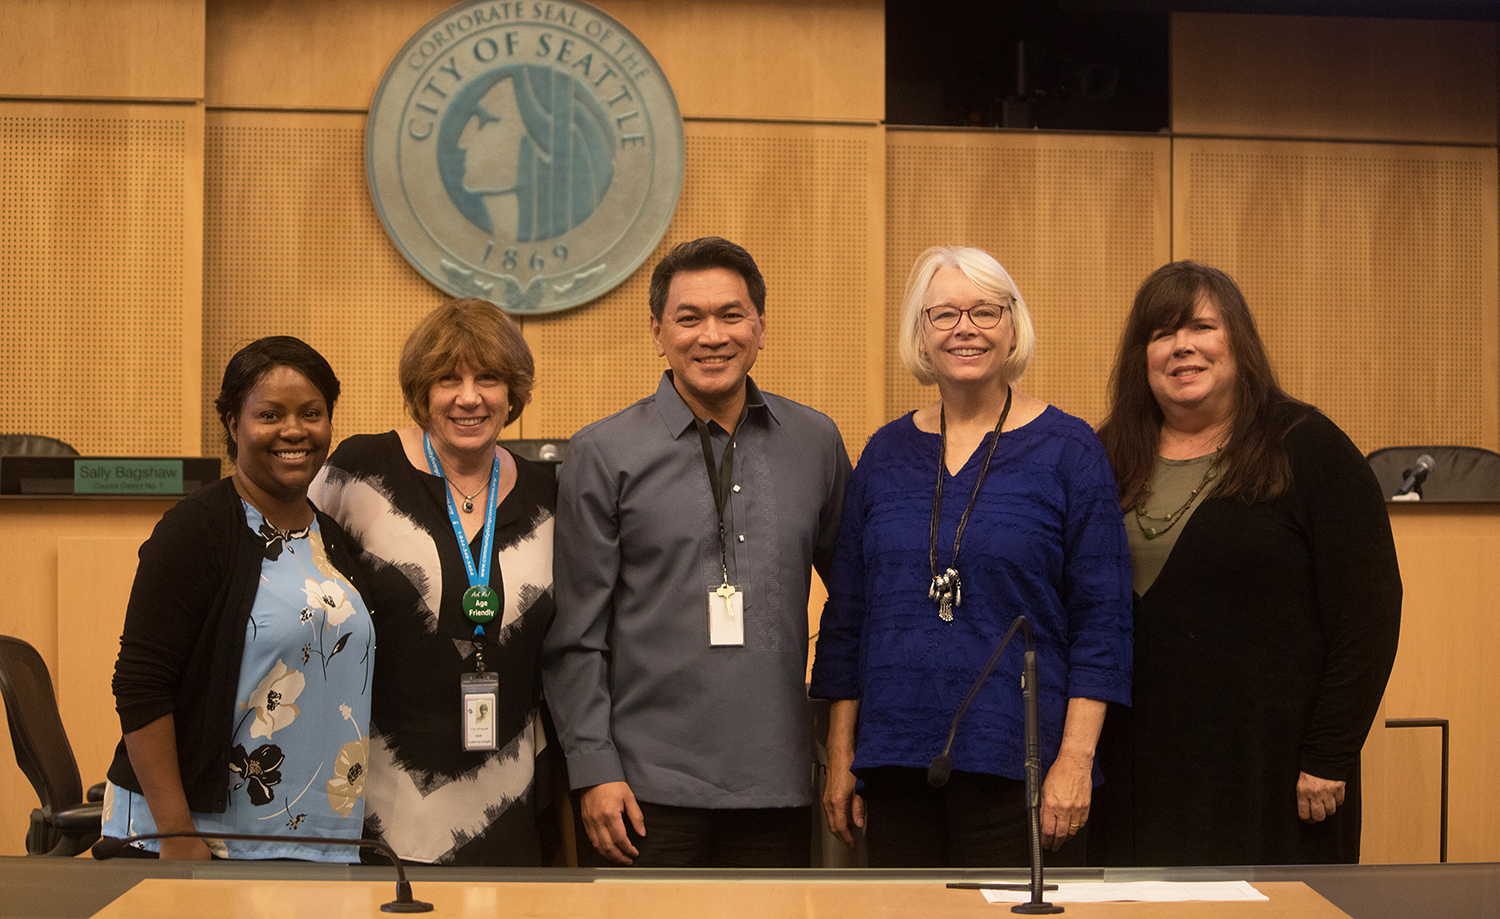 Lena Tebeau, Cathy Knight, G De Castro, Sally Bagshaw, and Cathy MacCaul following the lunch-and-learn on The Affordability of Long-Term Care in the Seattle City Council Chamber (9/4/19).